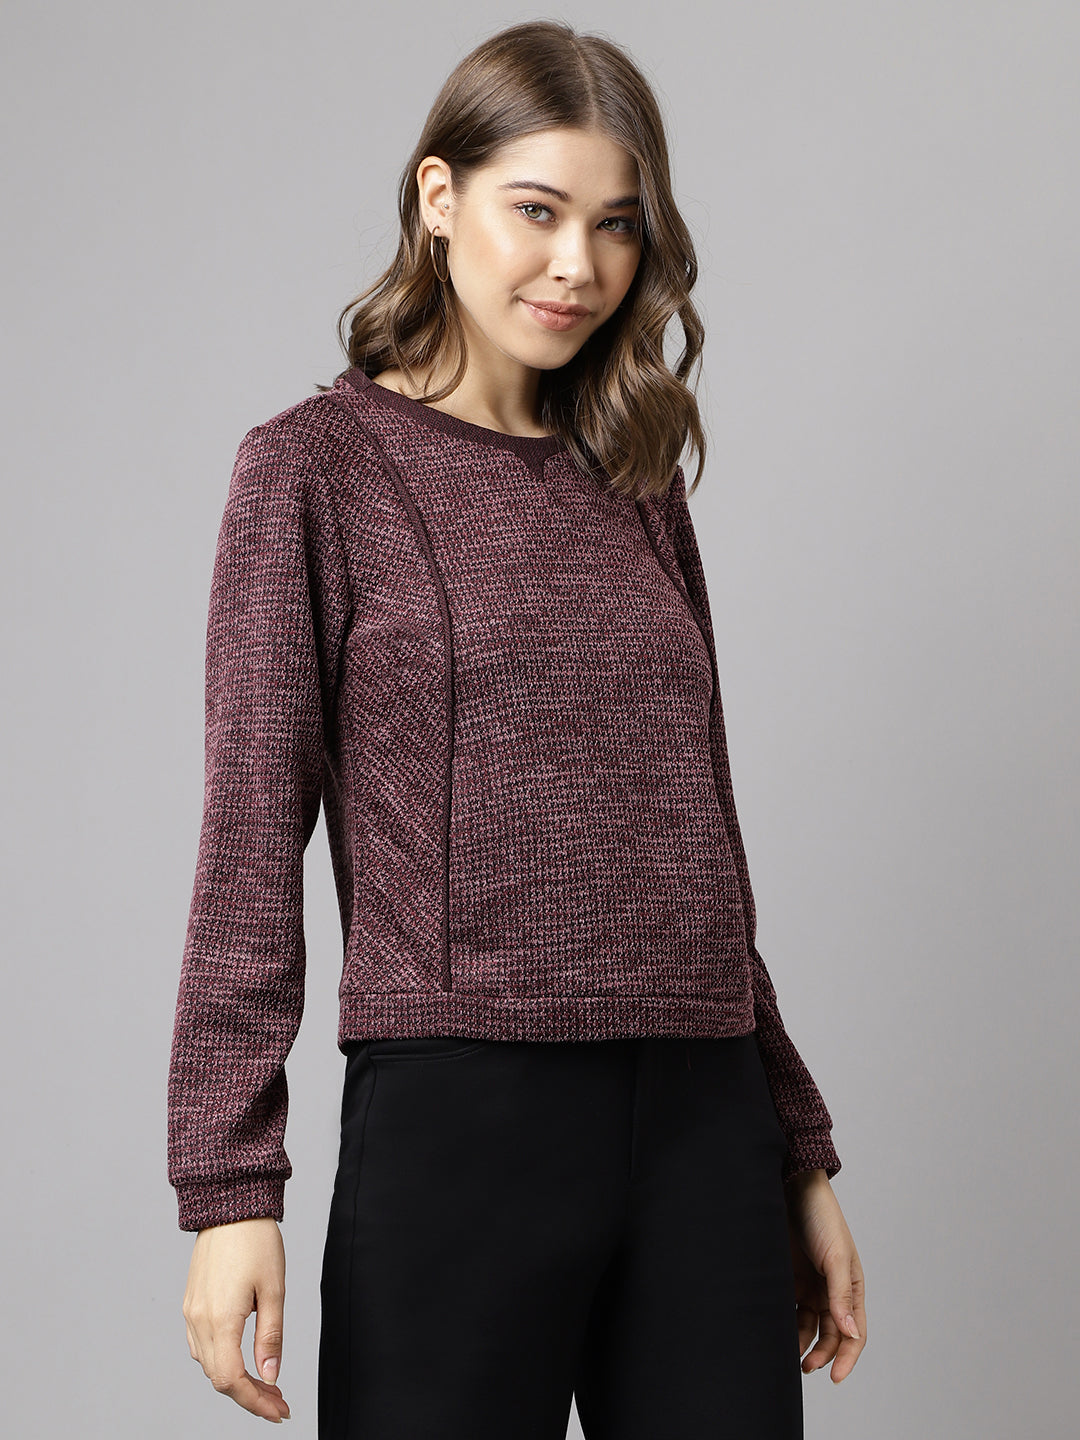 Wine Full Sleeve Solid Knit Top